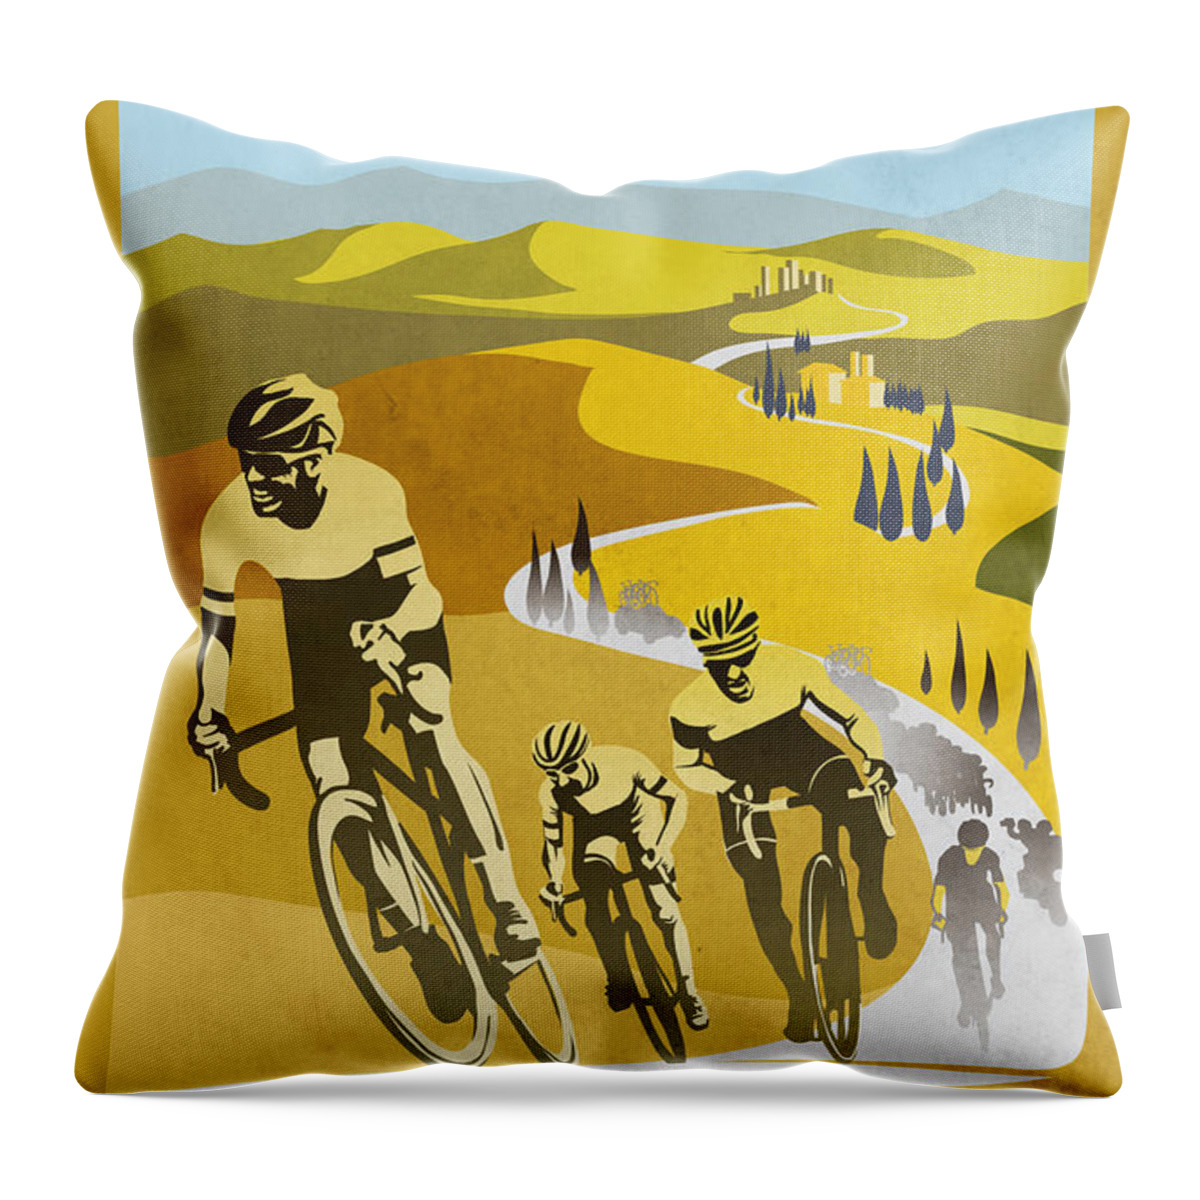 Vintage Cycling Throw Pillow featuring the painting Print #1 by Sassan Filsoof